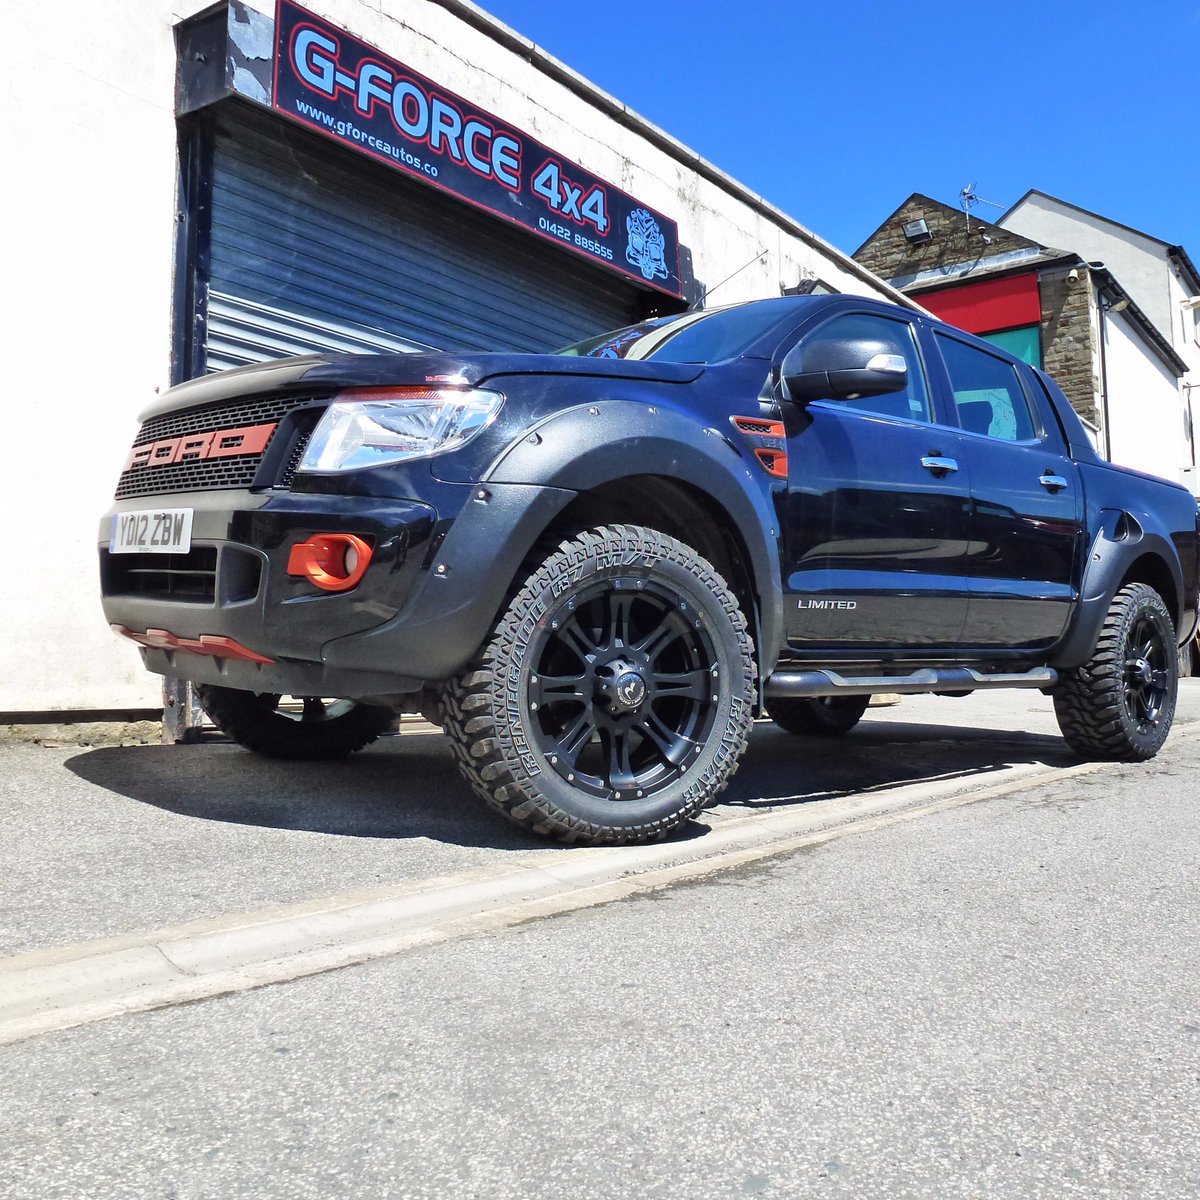 G Force 4x4 Wheels And Tyres For Ford Ranger And Most 4x4 From G Force 4x4